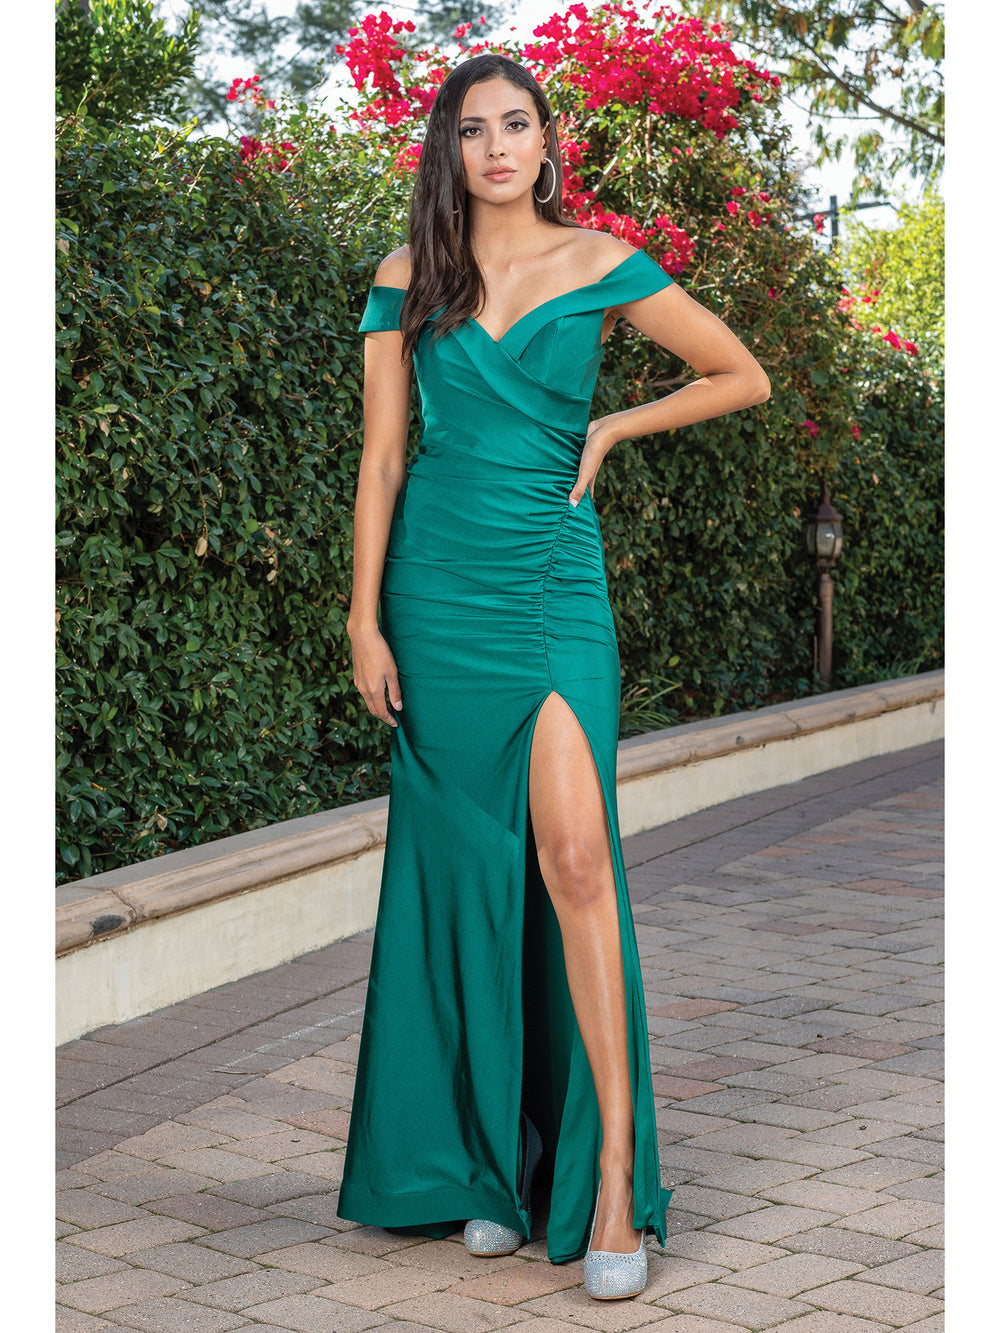 DQ 4278 - Off The Shoulder Stretch Jersey Fit & Flare Prom Gown with Ruched Bodice & Leg Slit PROM GOWN Dancing Queen XS HUNTER GREEN 